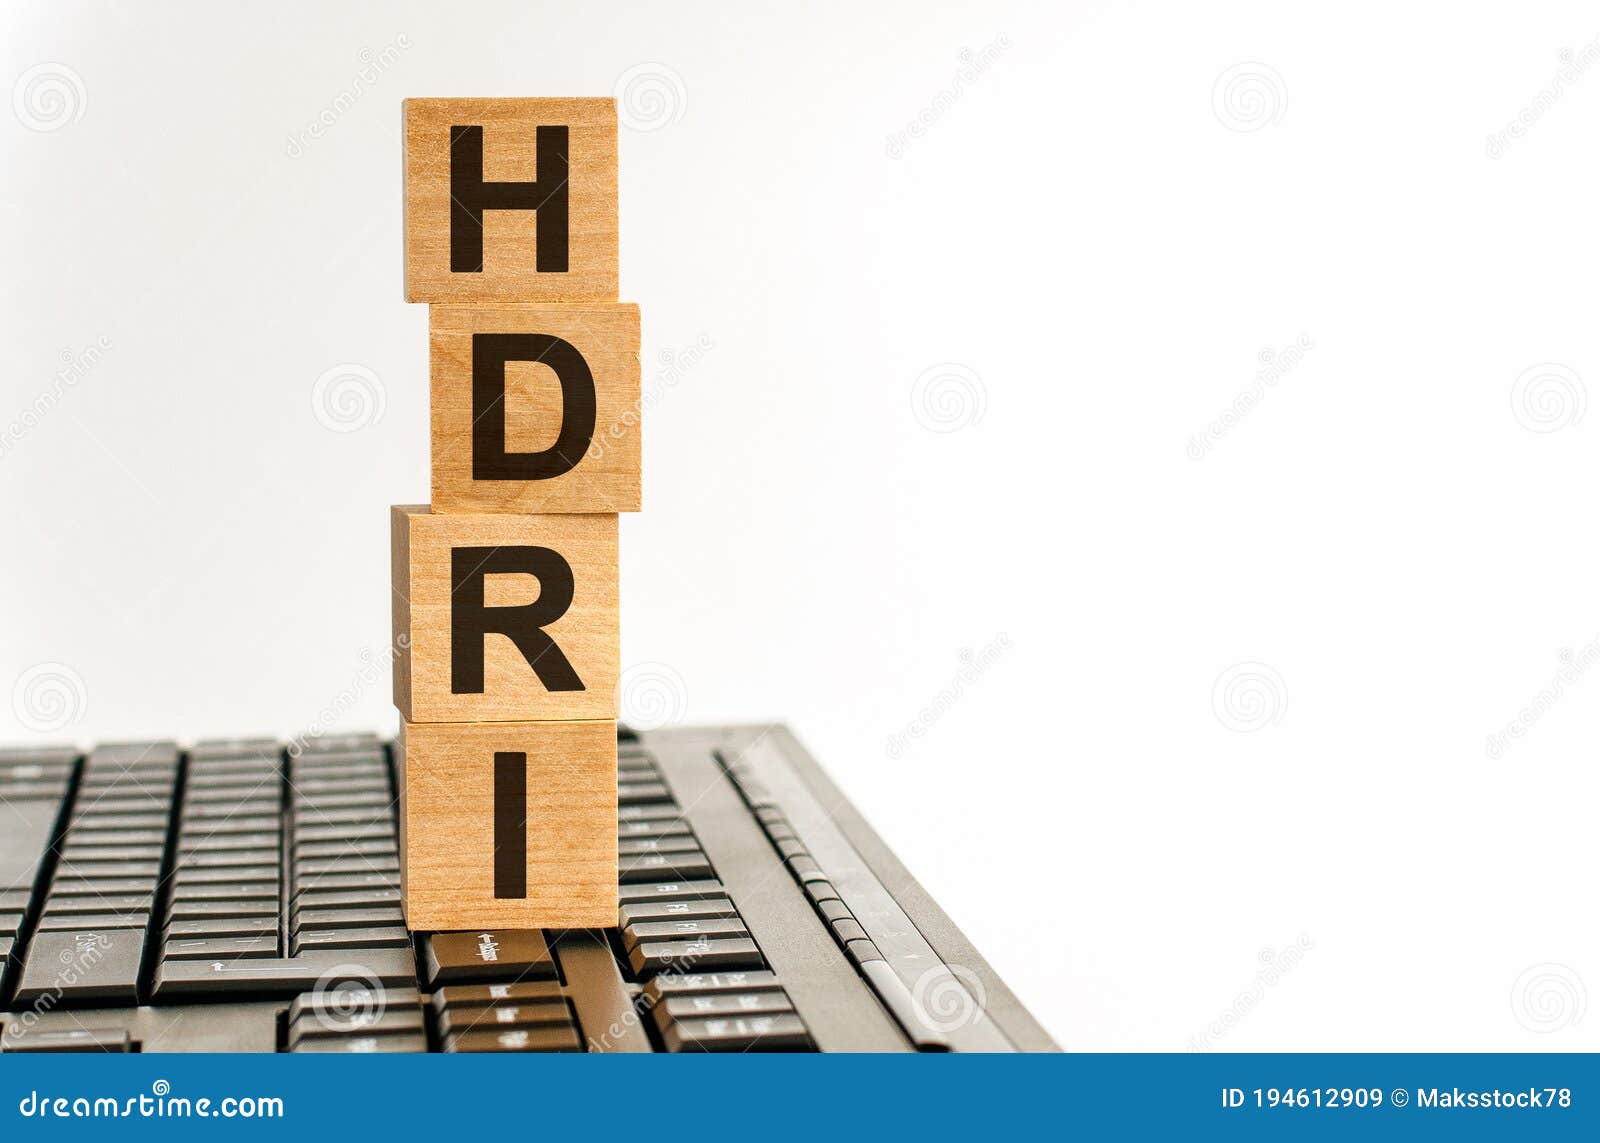 concept image a wooden block and word - hdri - high dynamic range imaging on white background